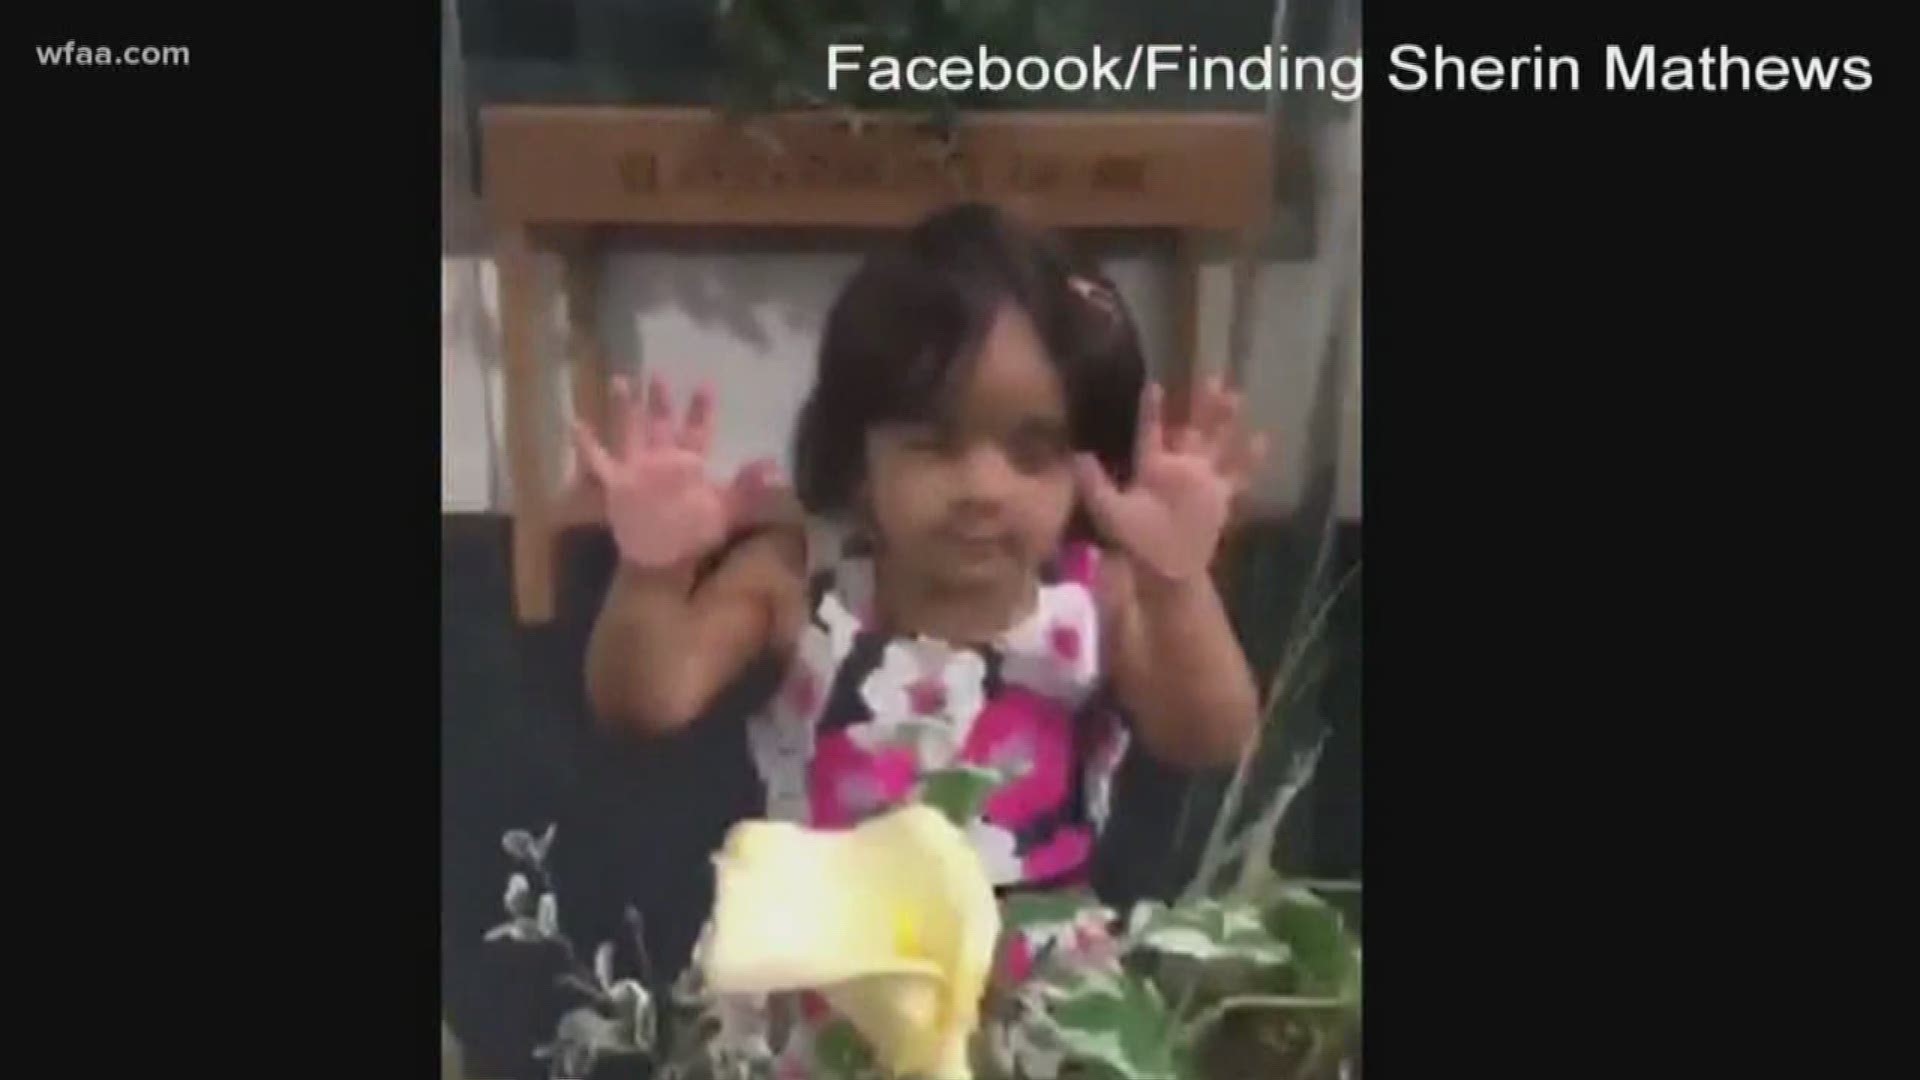 CPS report details prior alleged abuse investigation in Sherin Mathews case